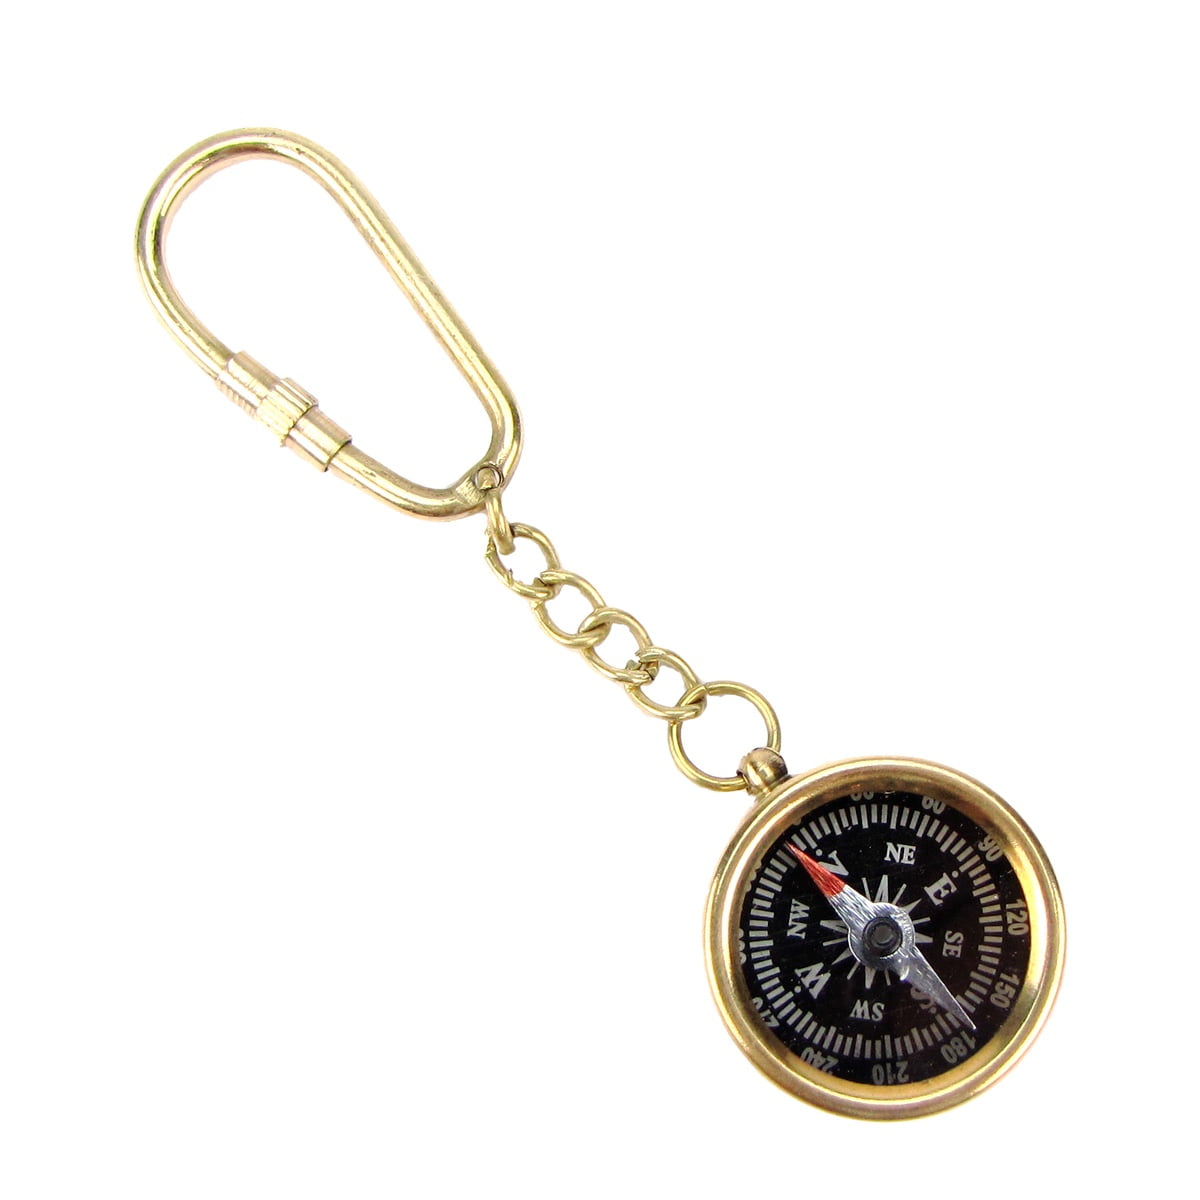 SET OF 4 PCS NAUTICAL STYLE BRASS POCKET KEY CHAIN COMPASS COLLECTIBLE GIFT 